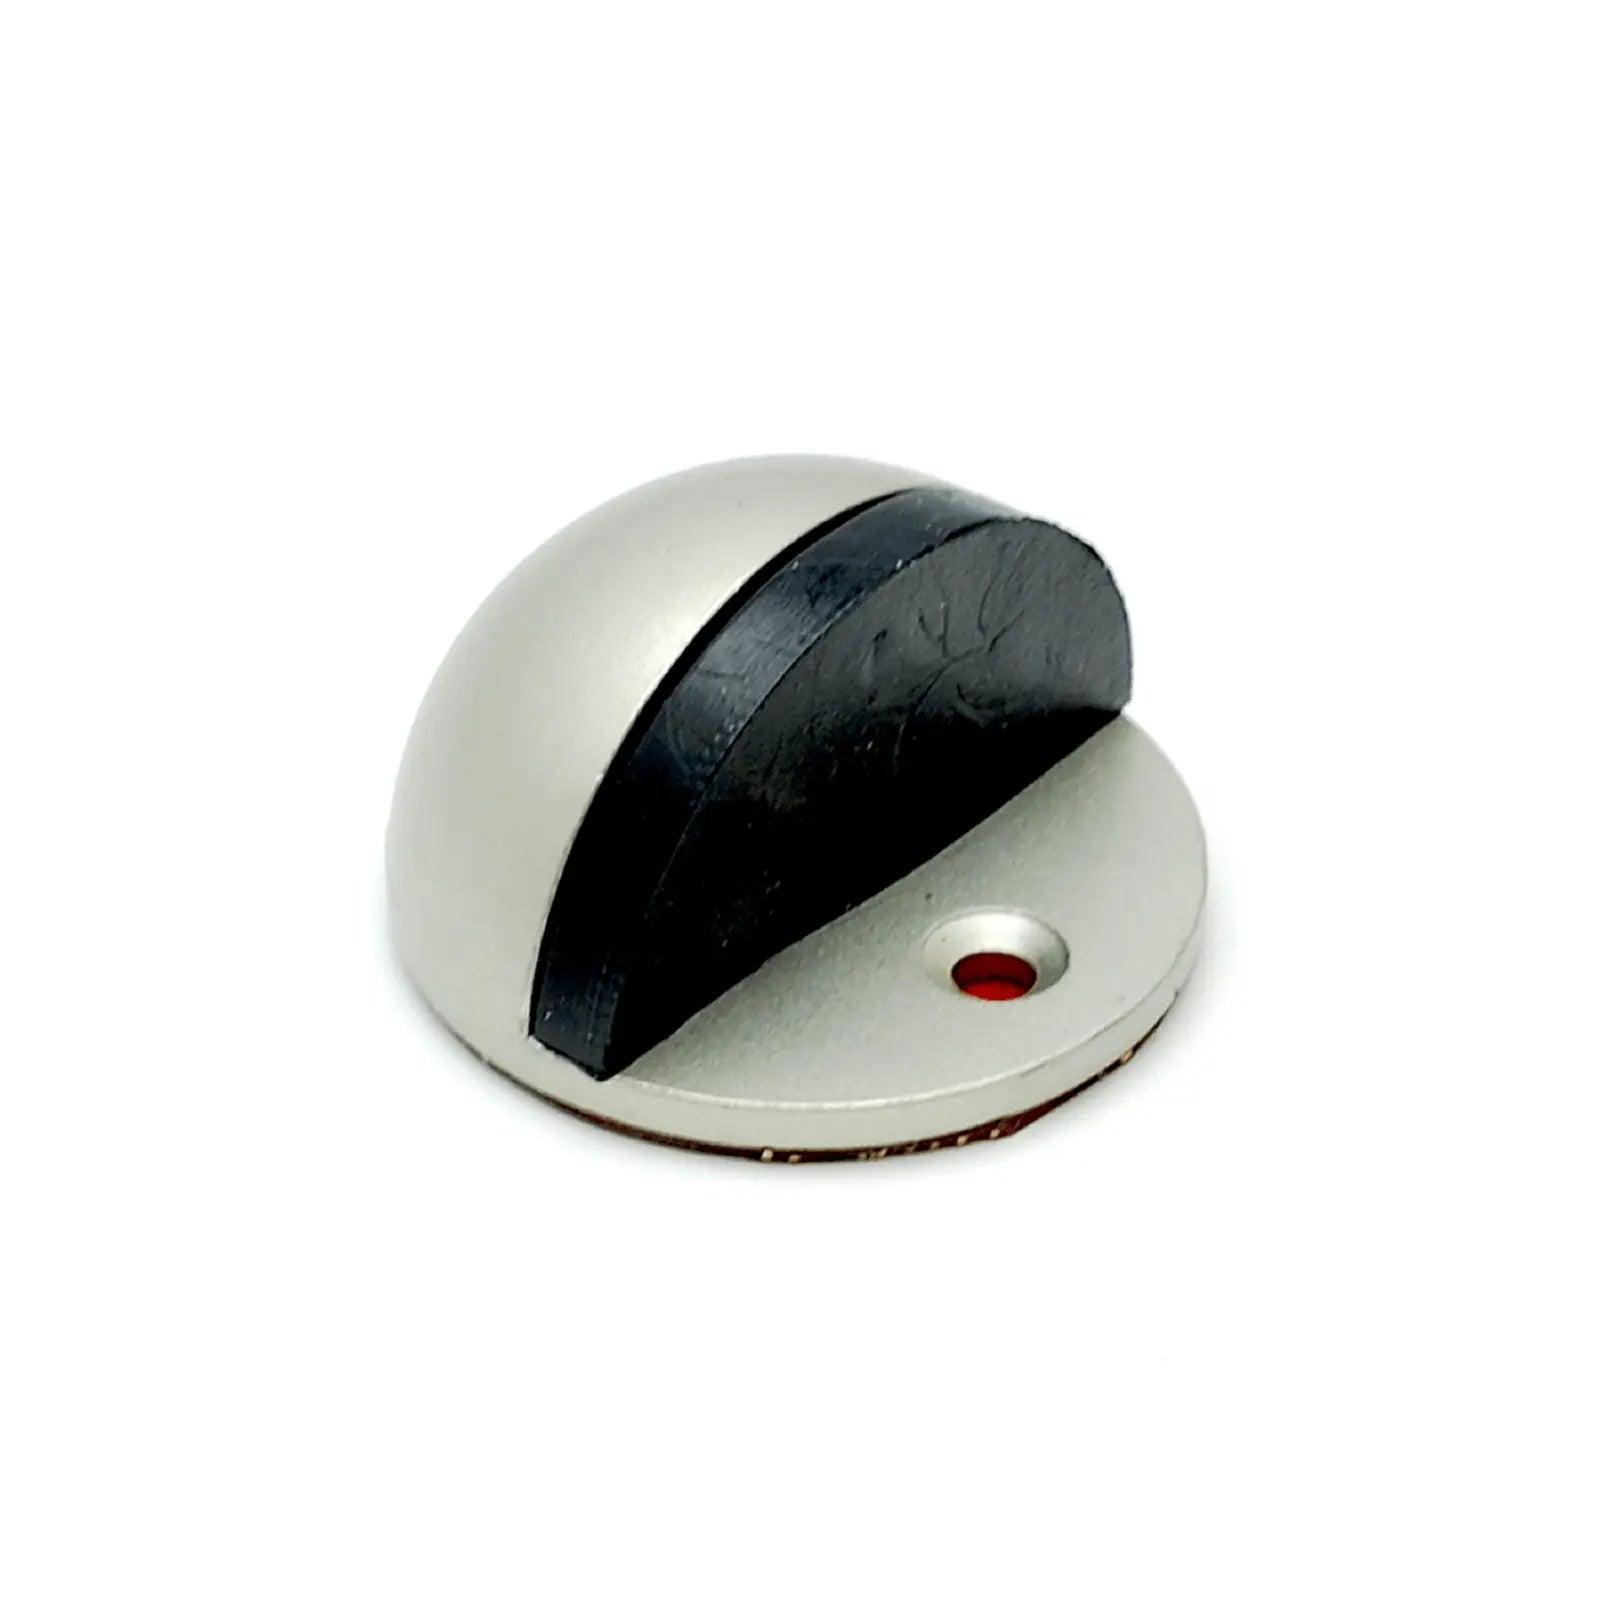 Self Adhesive Oval Door Stop Wall Protector - Decor And Decor